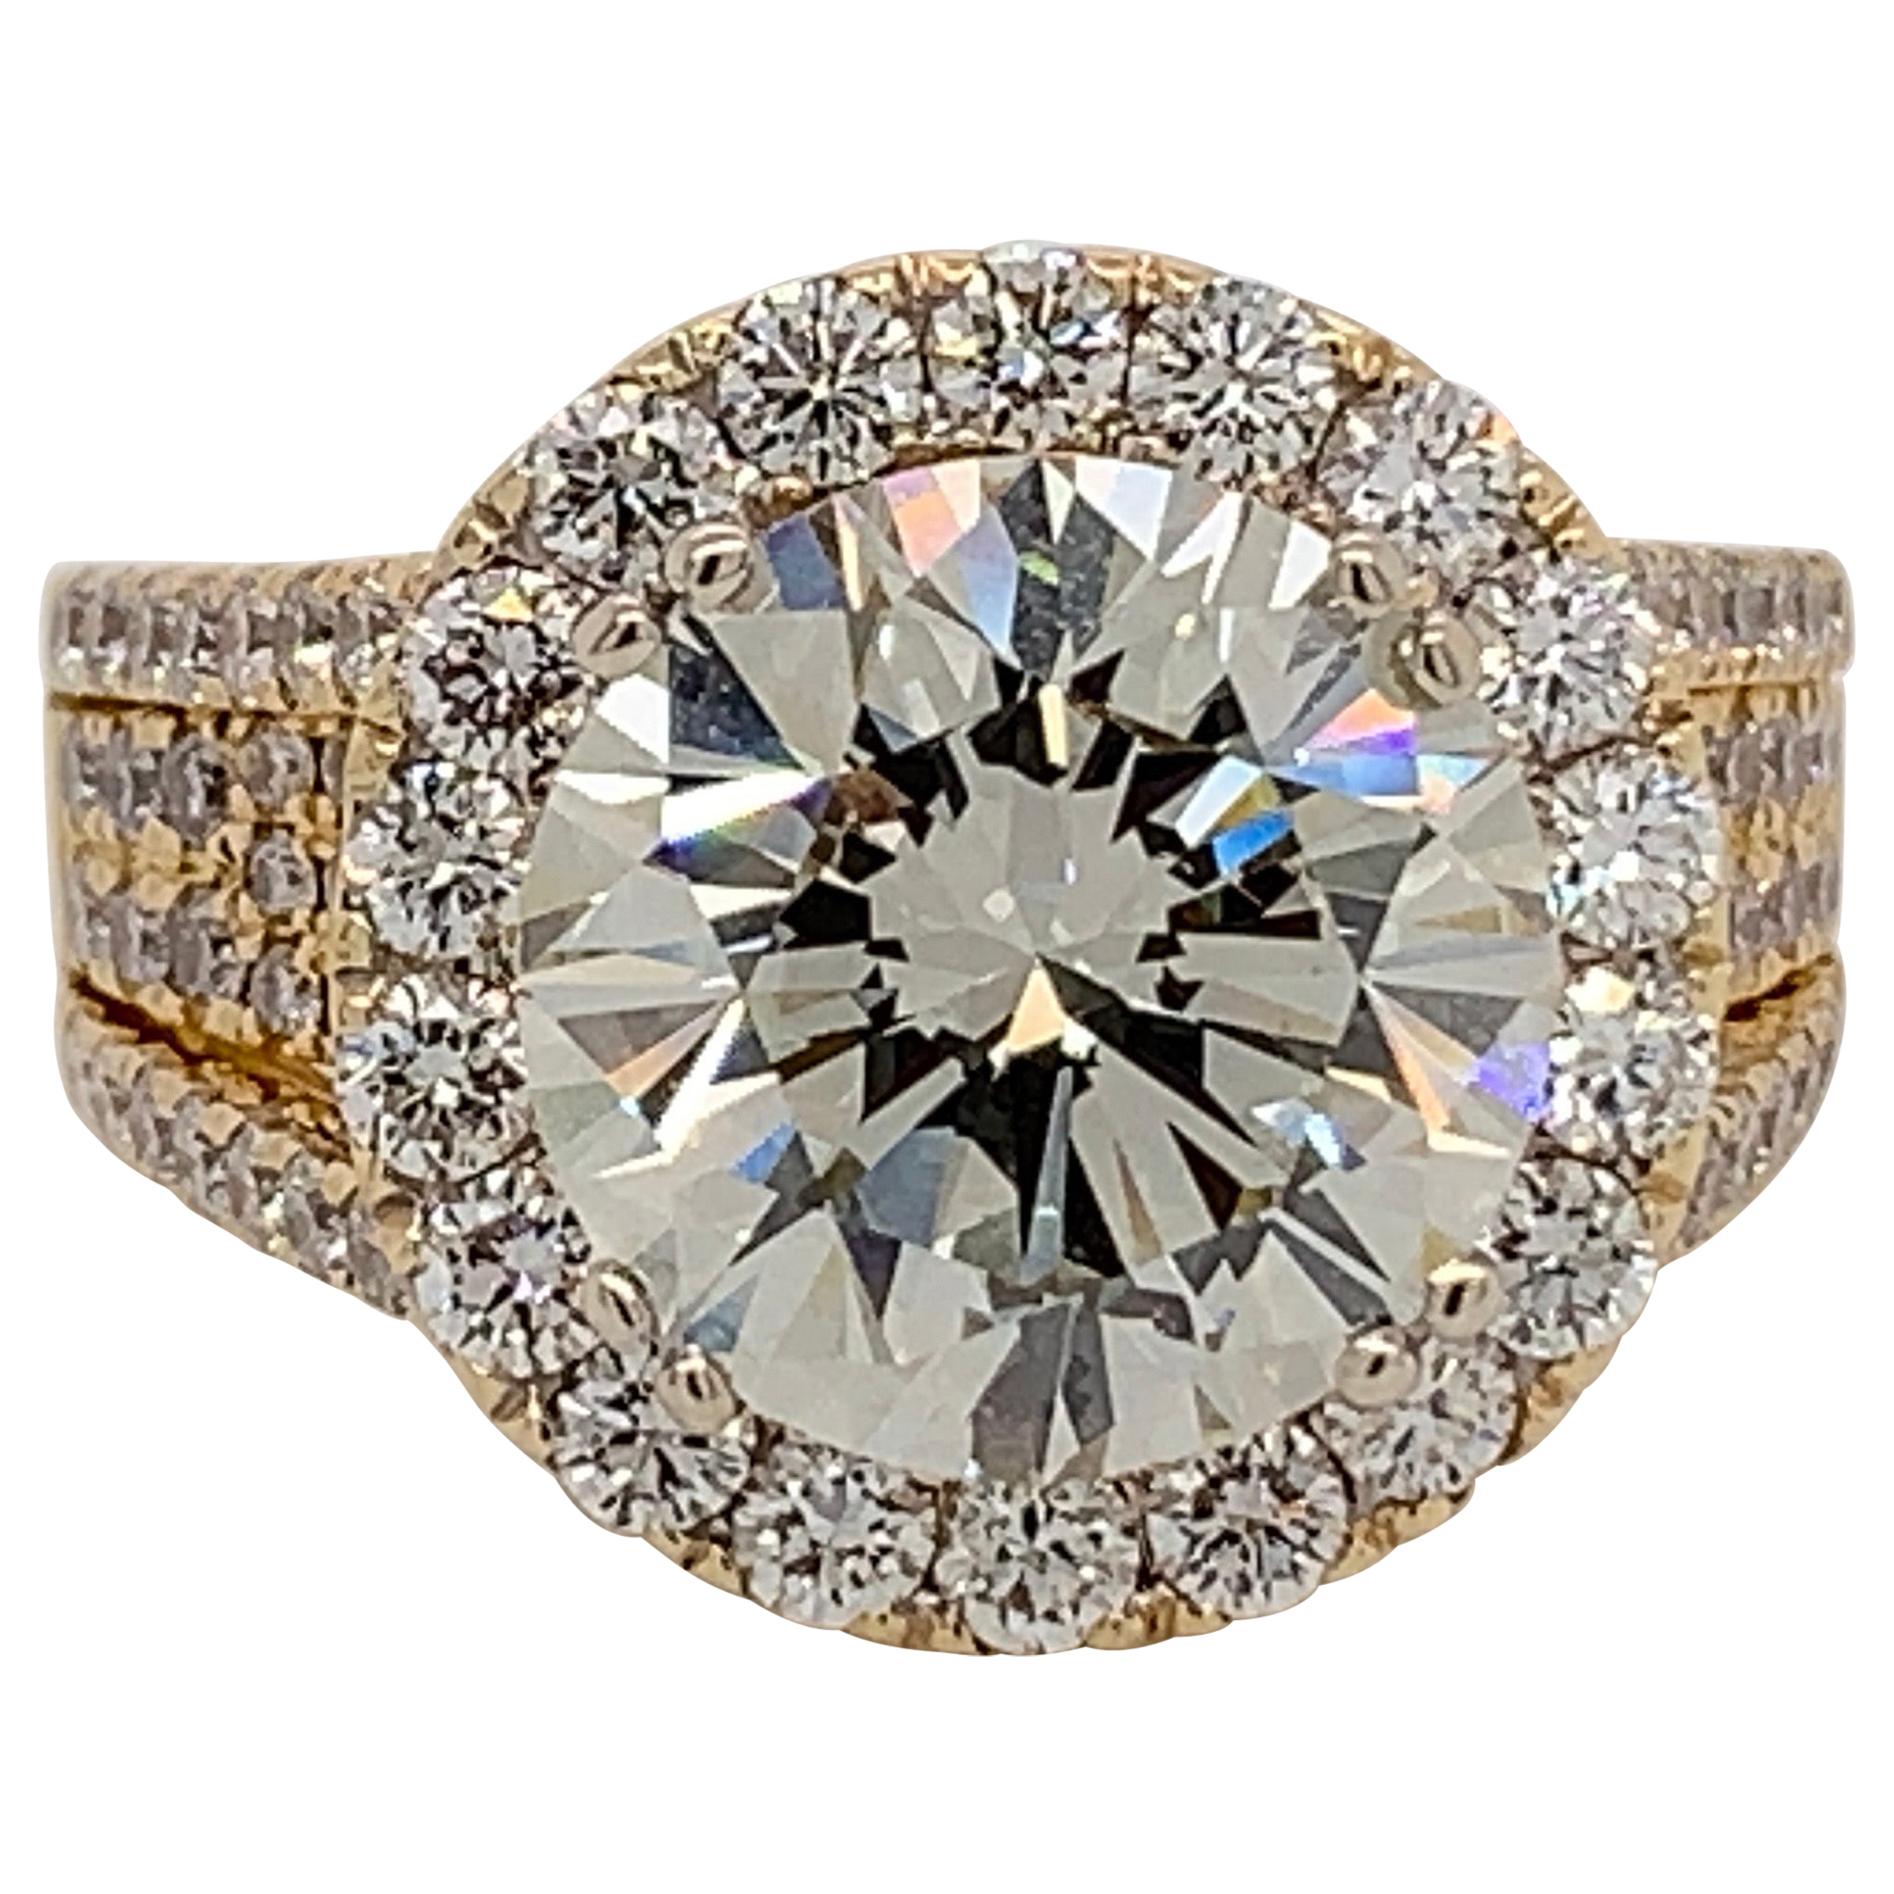 AGS Certified Natural Diamond 5.11 Carat K SI2 Gold Engagement Cocktail Ring